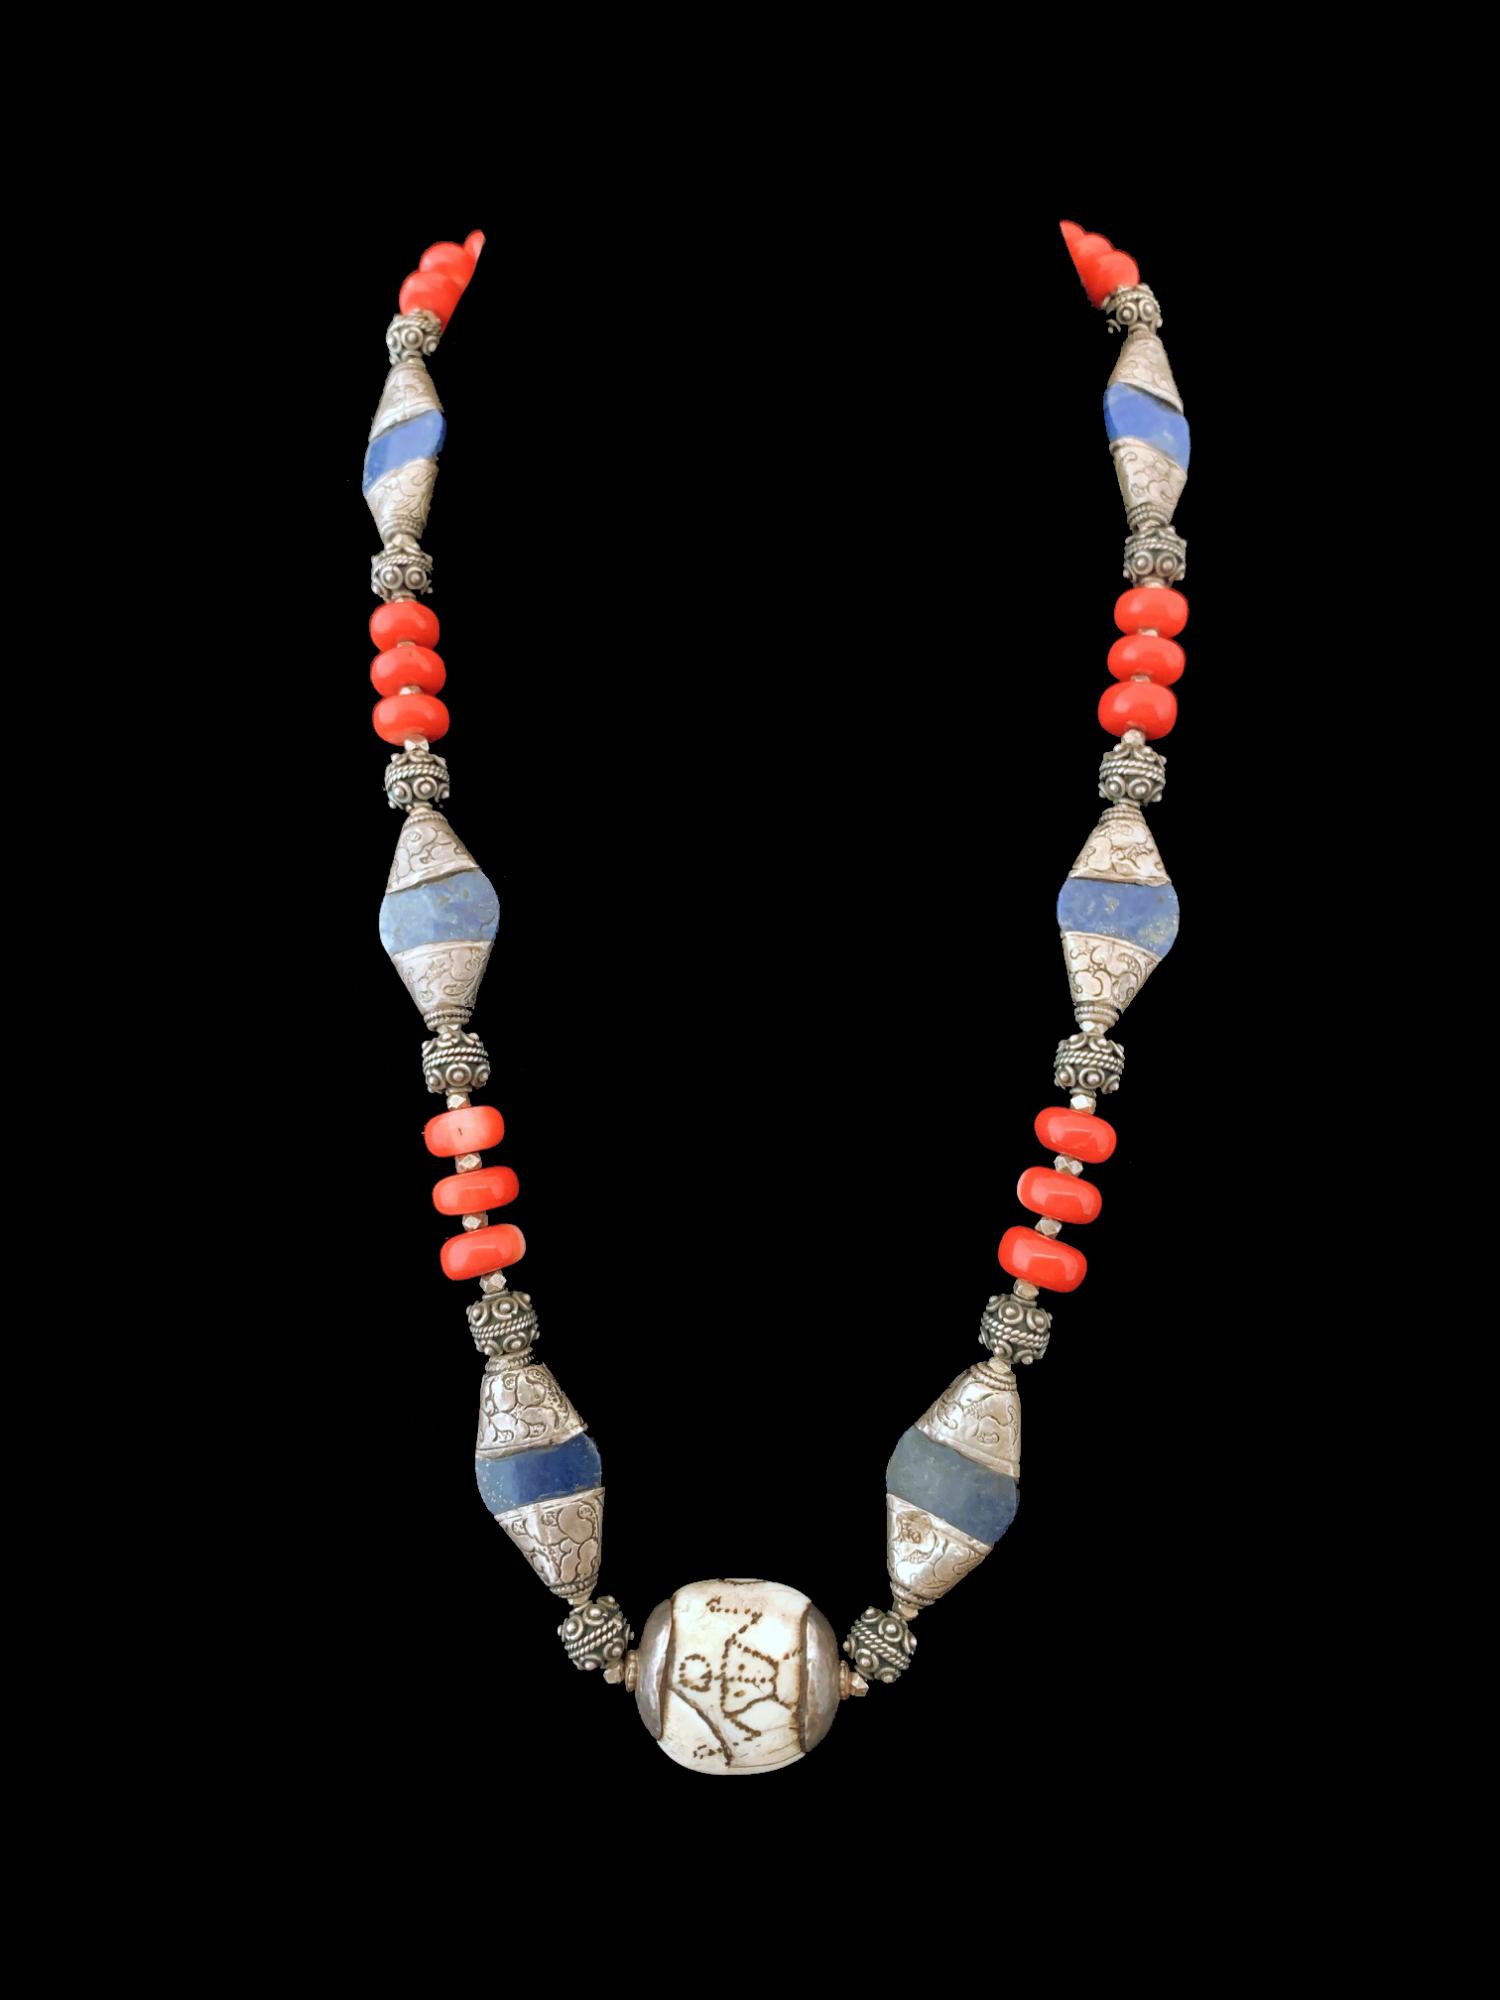 Engraved Naga Centre Bead with Nepalese Lapis - Sold